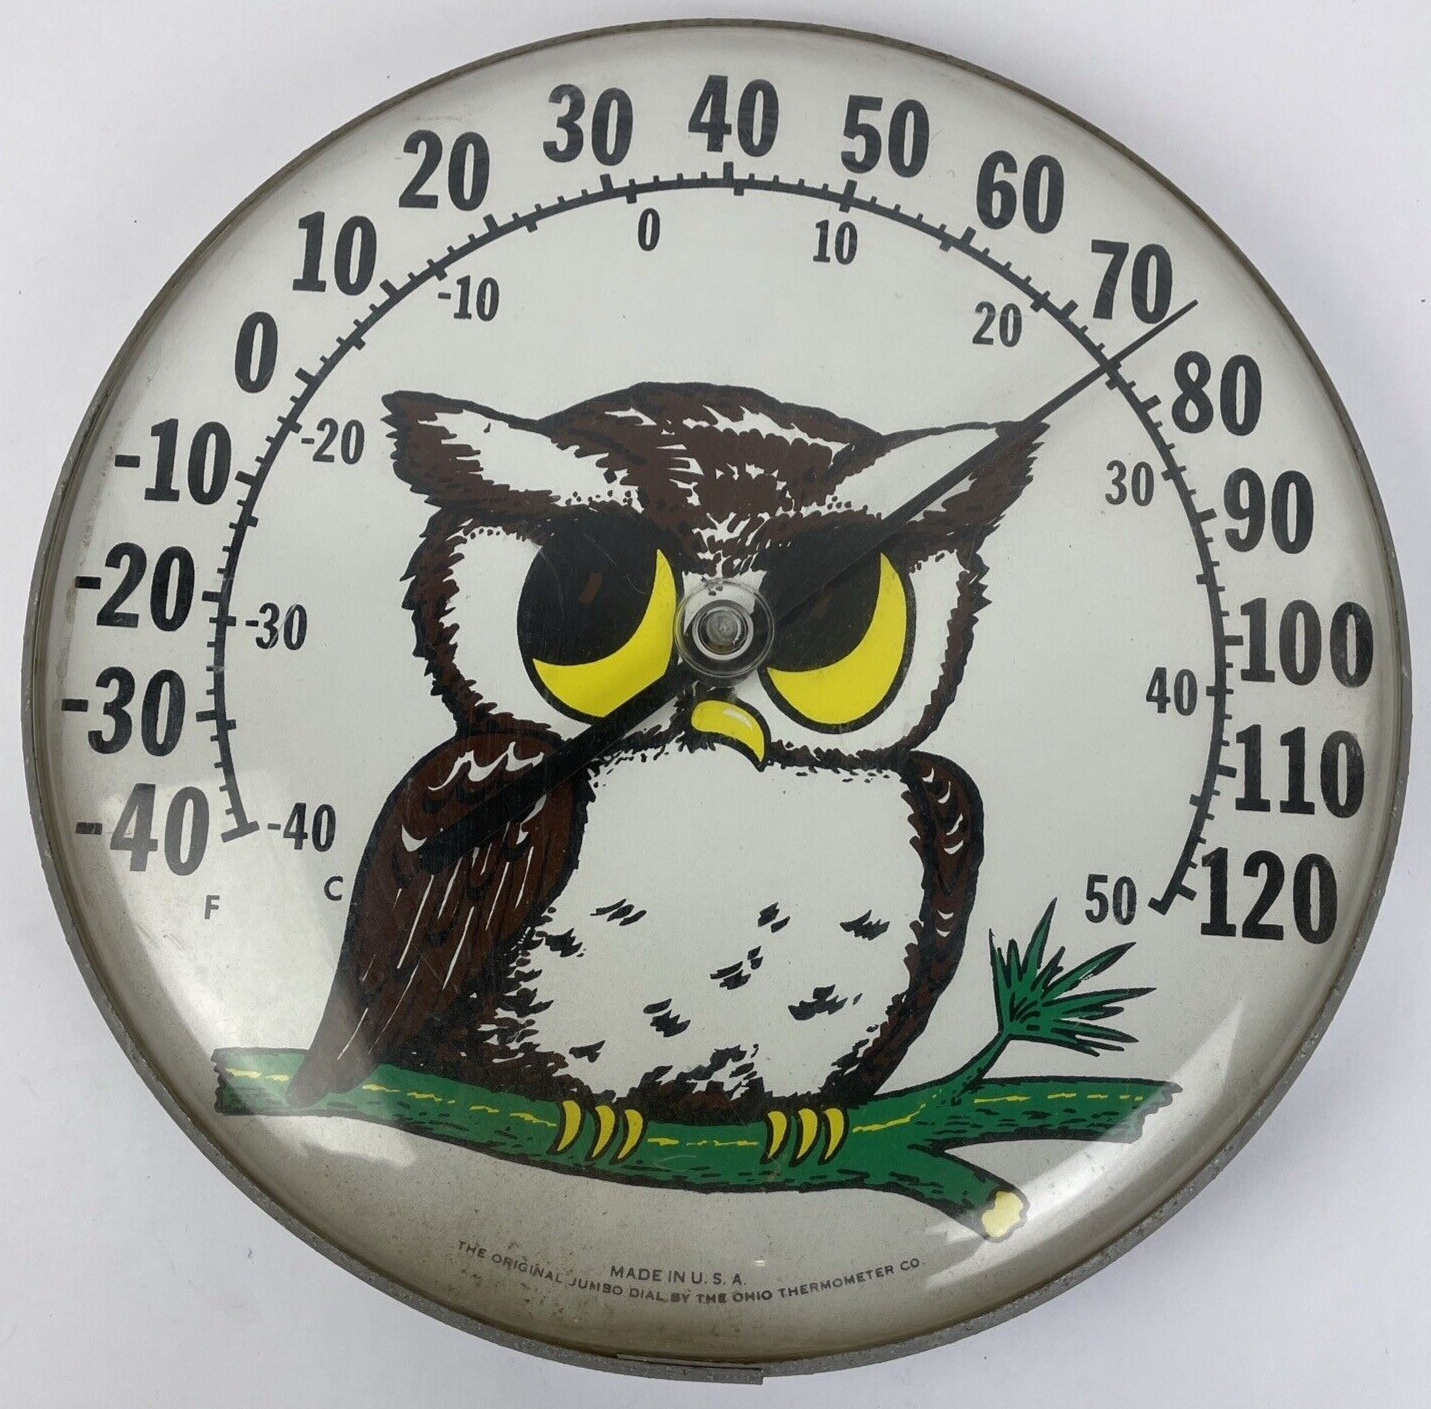 The Original Jumbo Dial Owl Thermometer Ohio Thermometer Co - Made in the USA